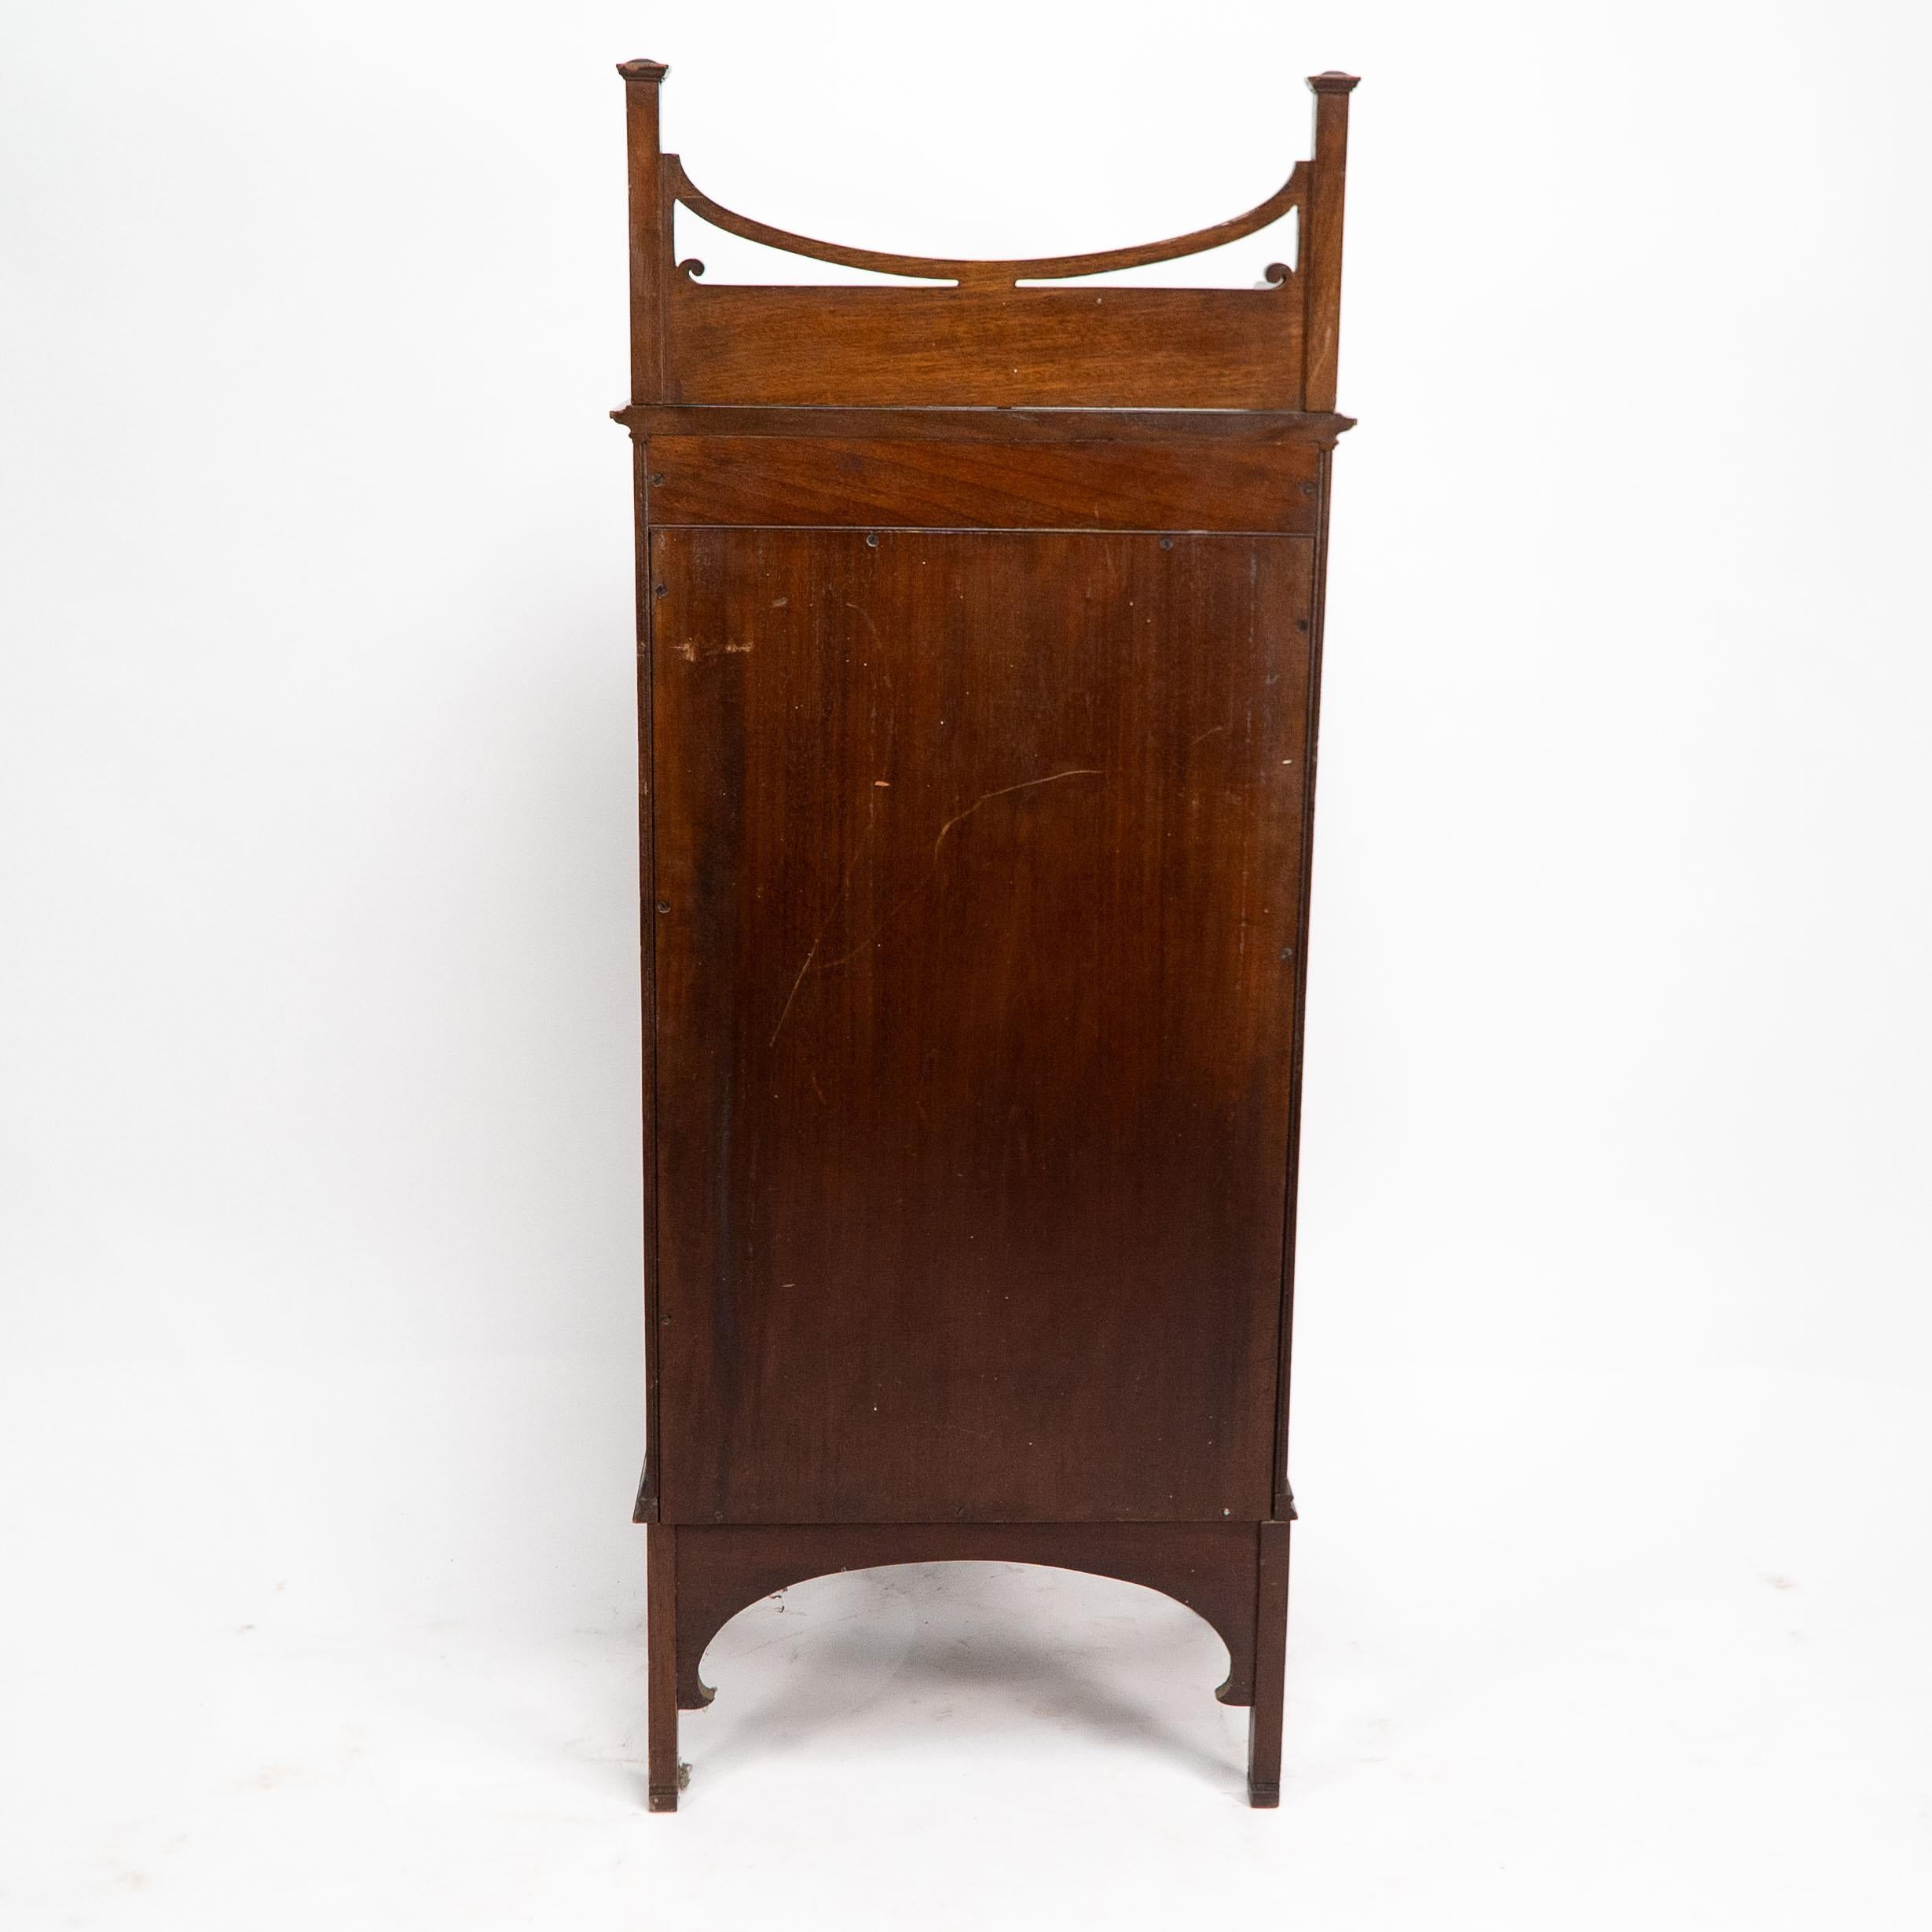 A Petite Arts & Crafts Mahogany Display Cabinet in the Anglo-Japanese Style. For Sale 4